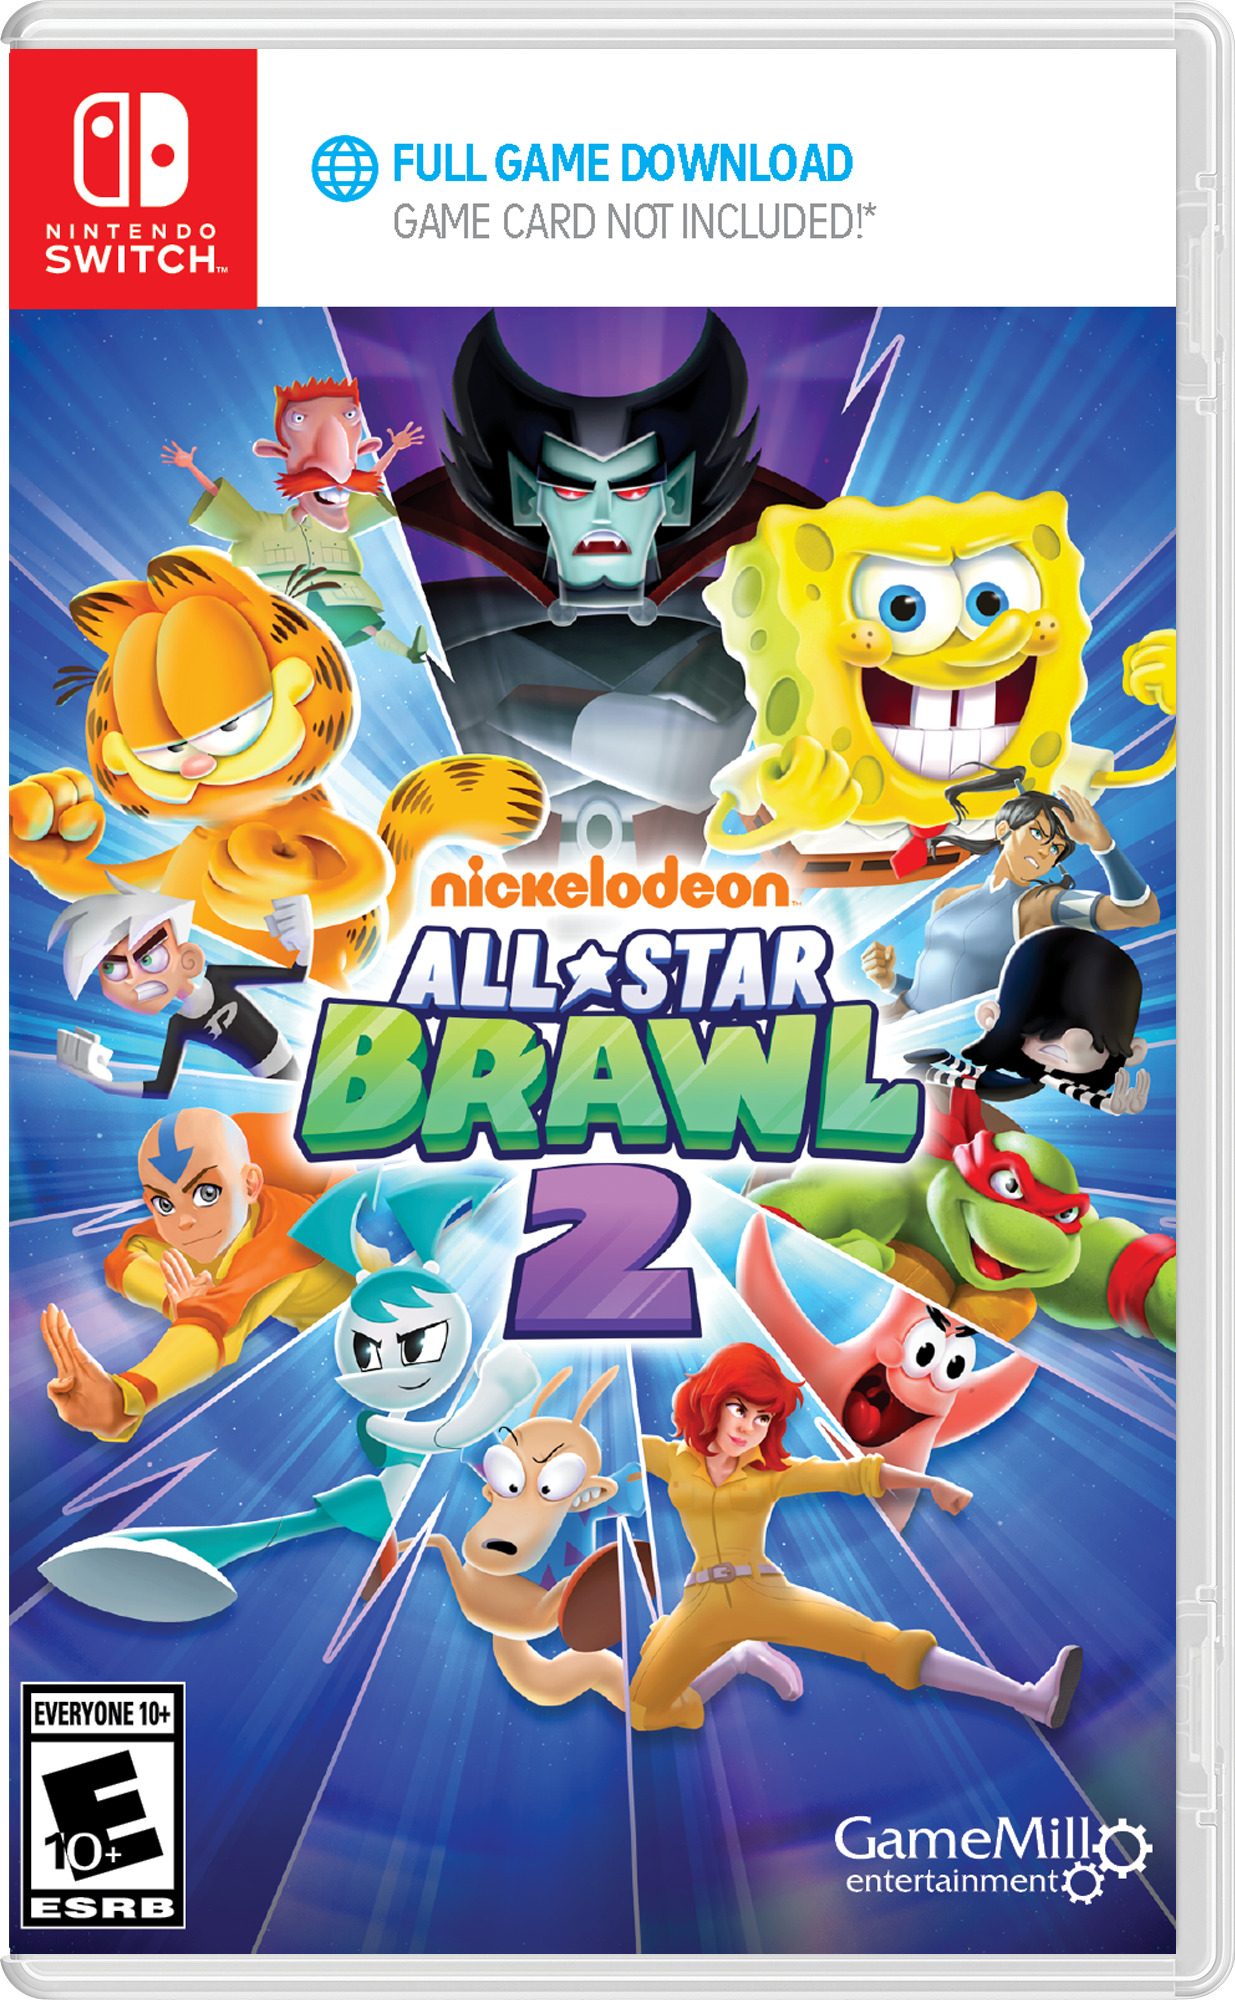 Anime Brawl: All Out codes – all the gems